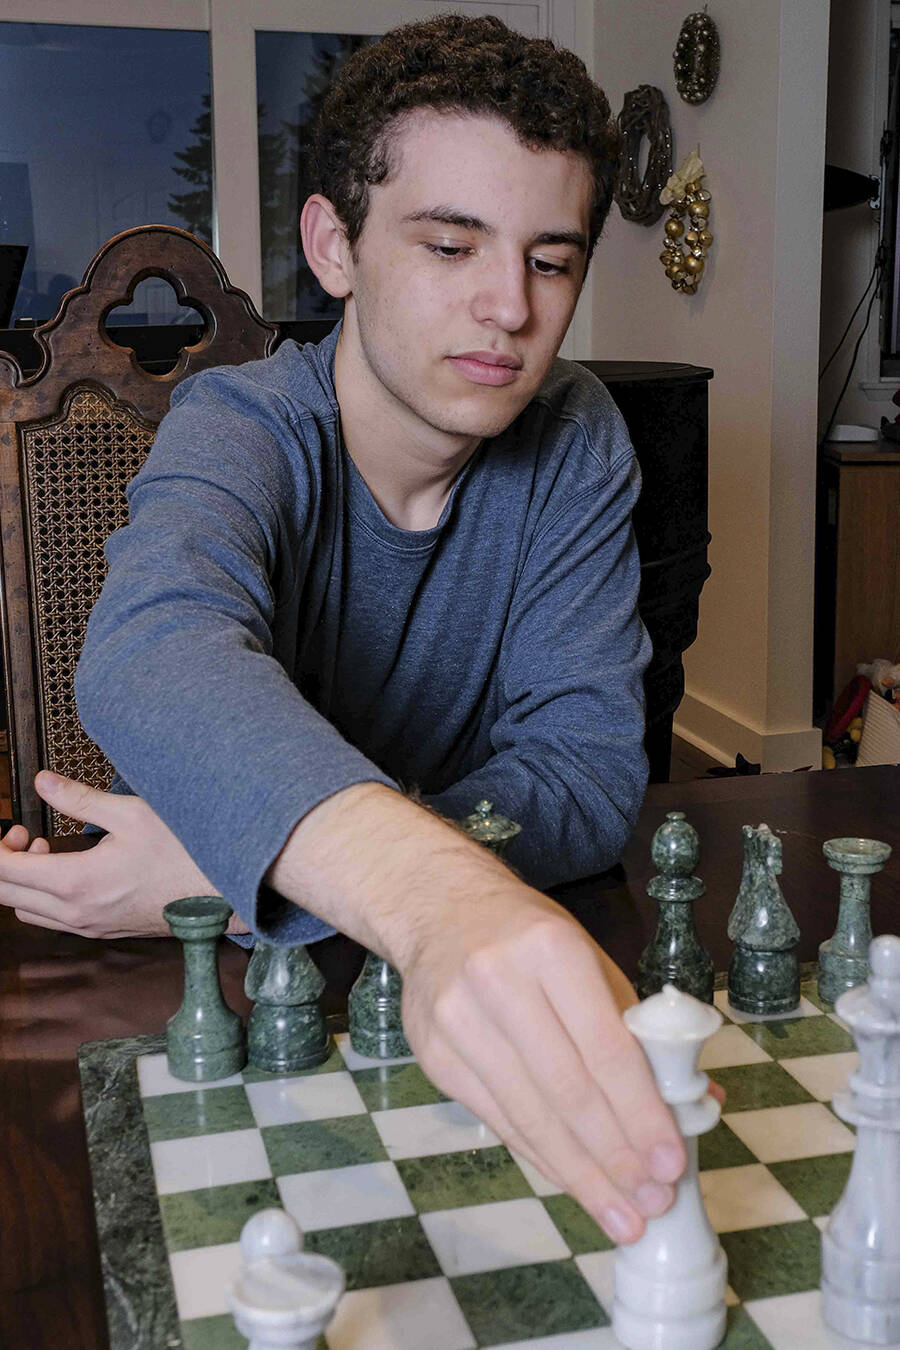 Playing chess is another hobby of Alec Rodriguez.